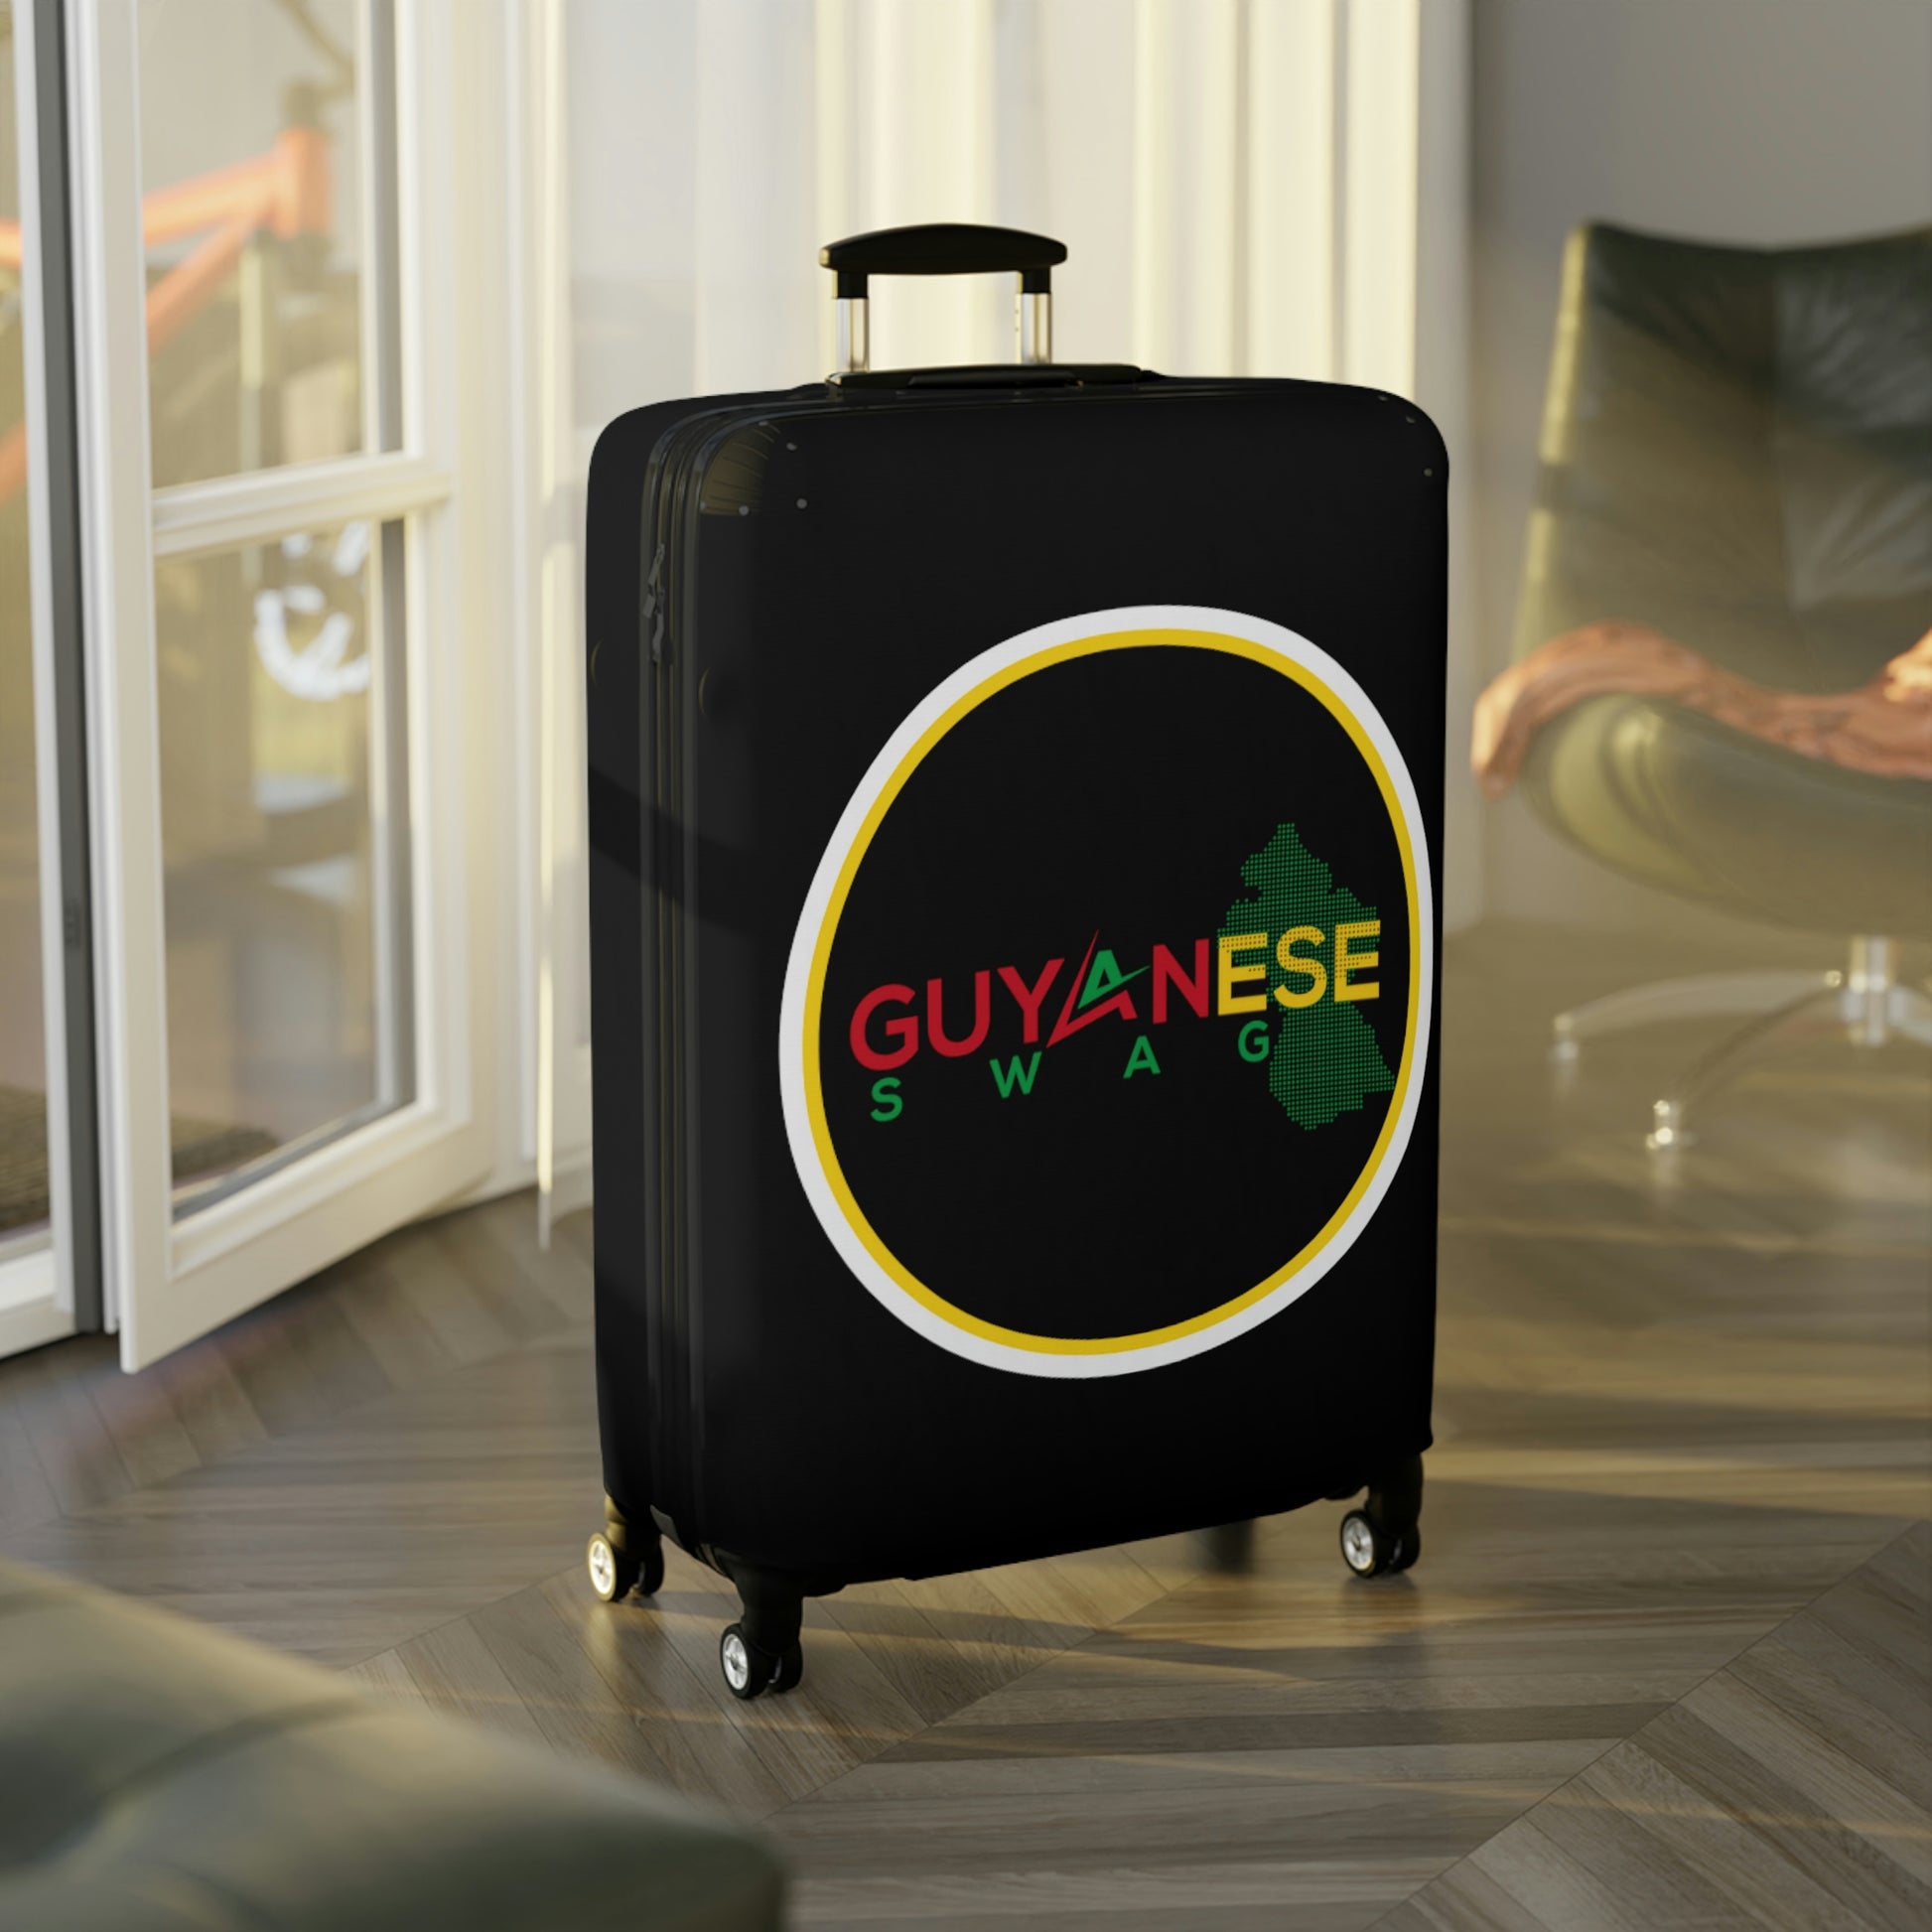 Guyanese Swag Luggage Cover.